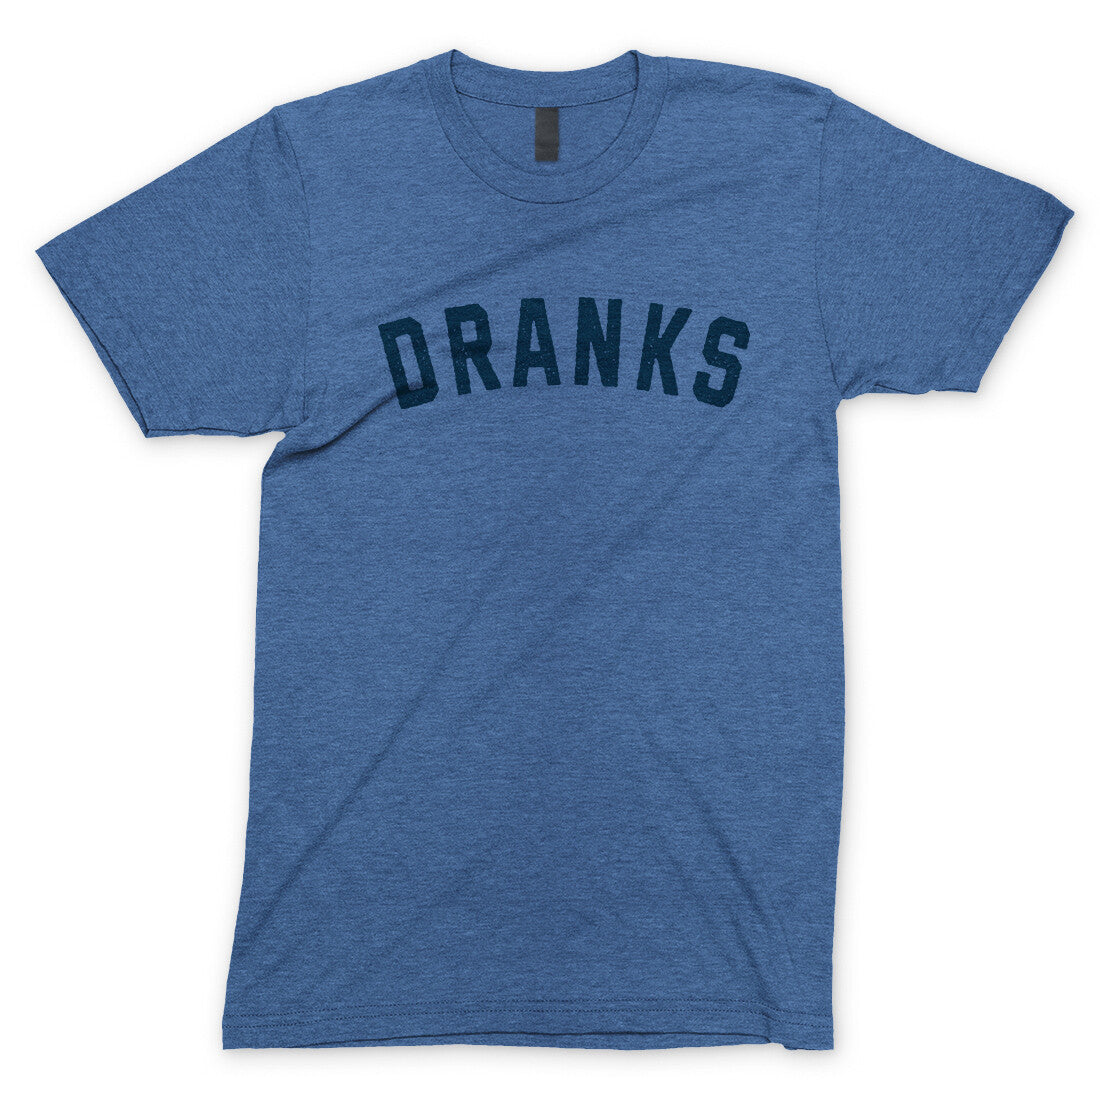 Dranks in Heather Royal Color